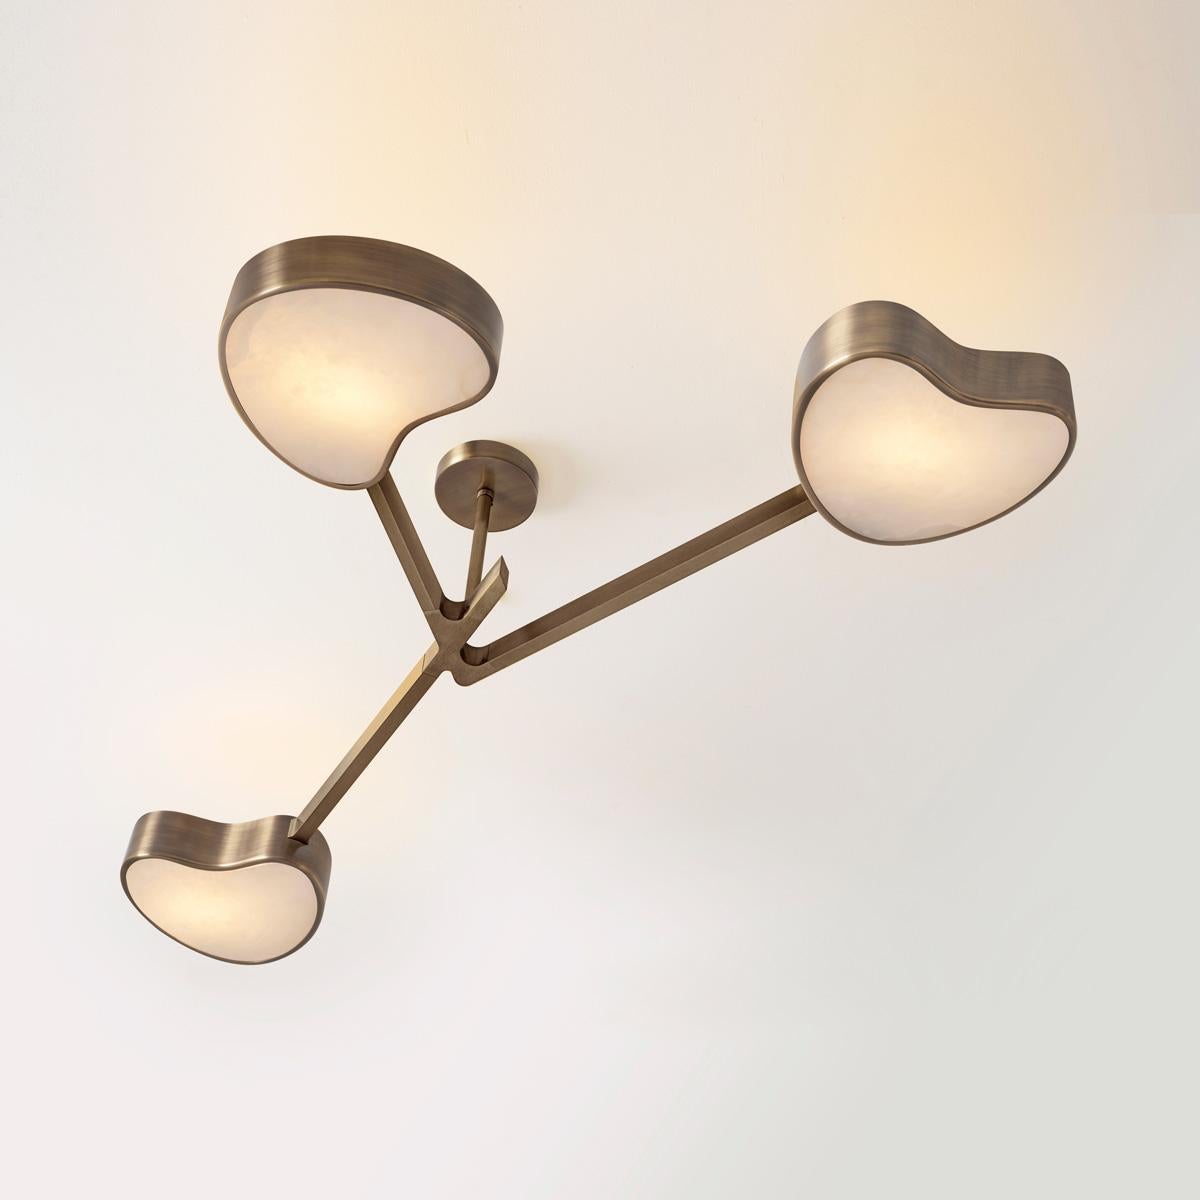 Italian Cuore N.3 Ceiling Light by Gaspare Asaro. Bronze Finish For Sale